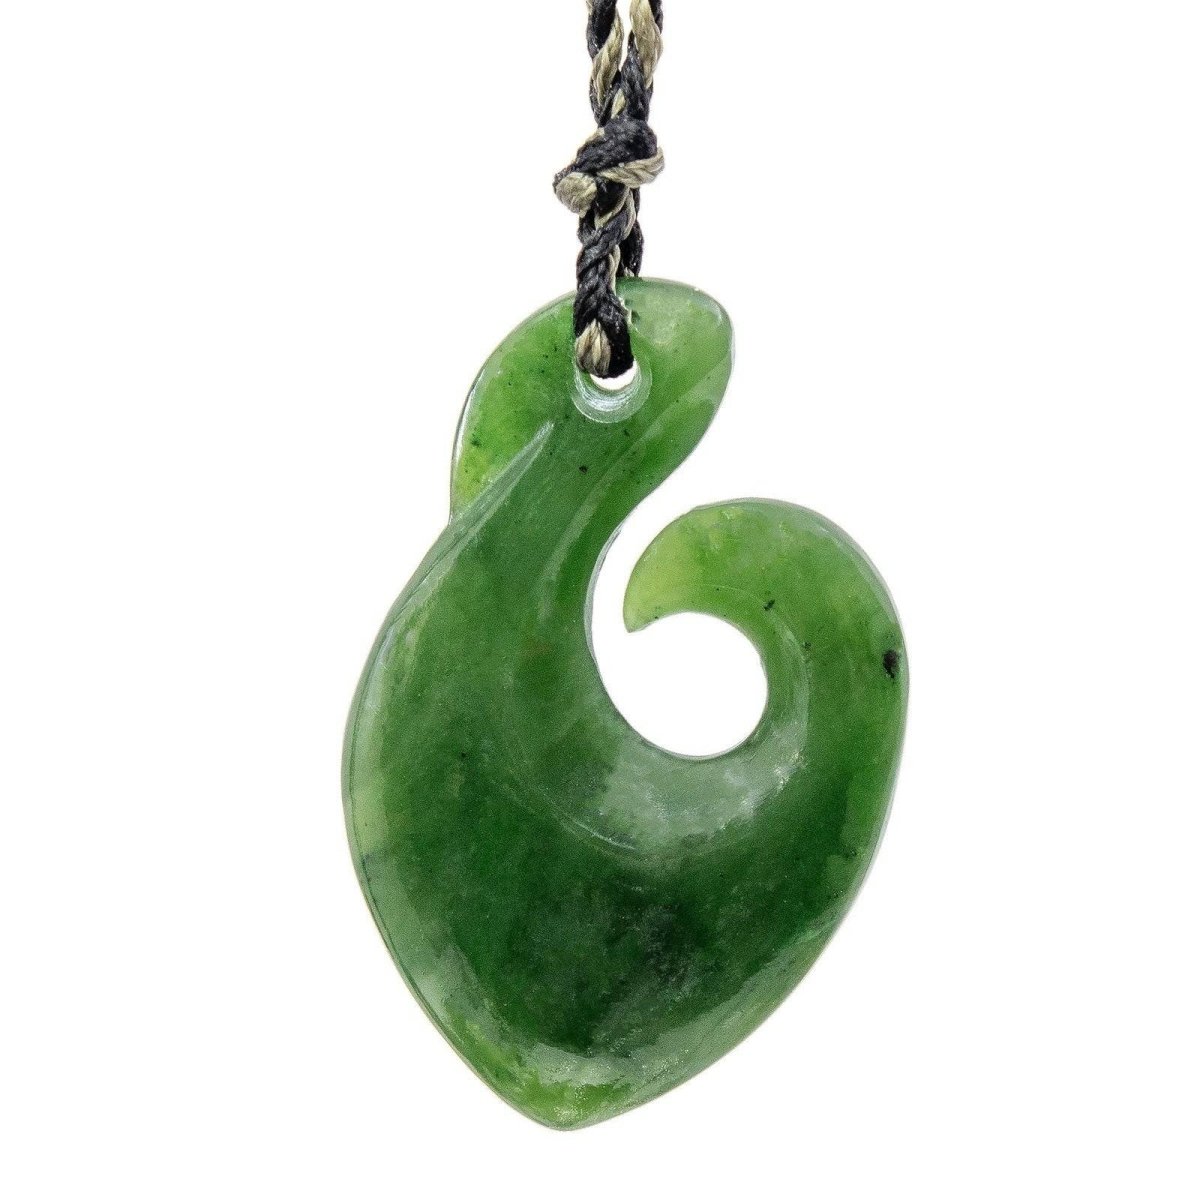 New Zealand Maori Inspired Nephrite Jade Fish Hook Necklace - Earthbound Pacific